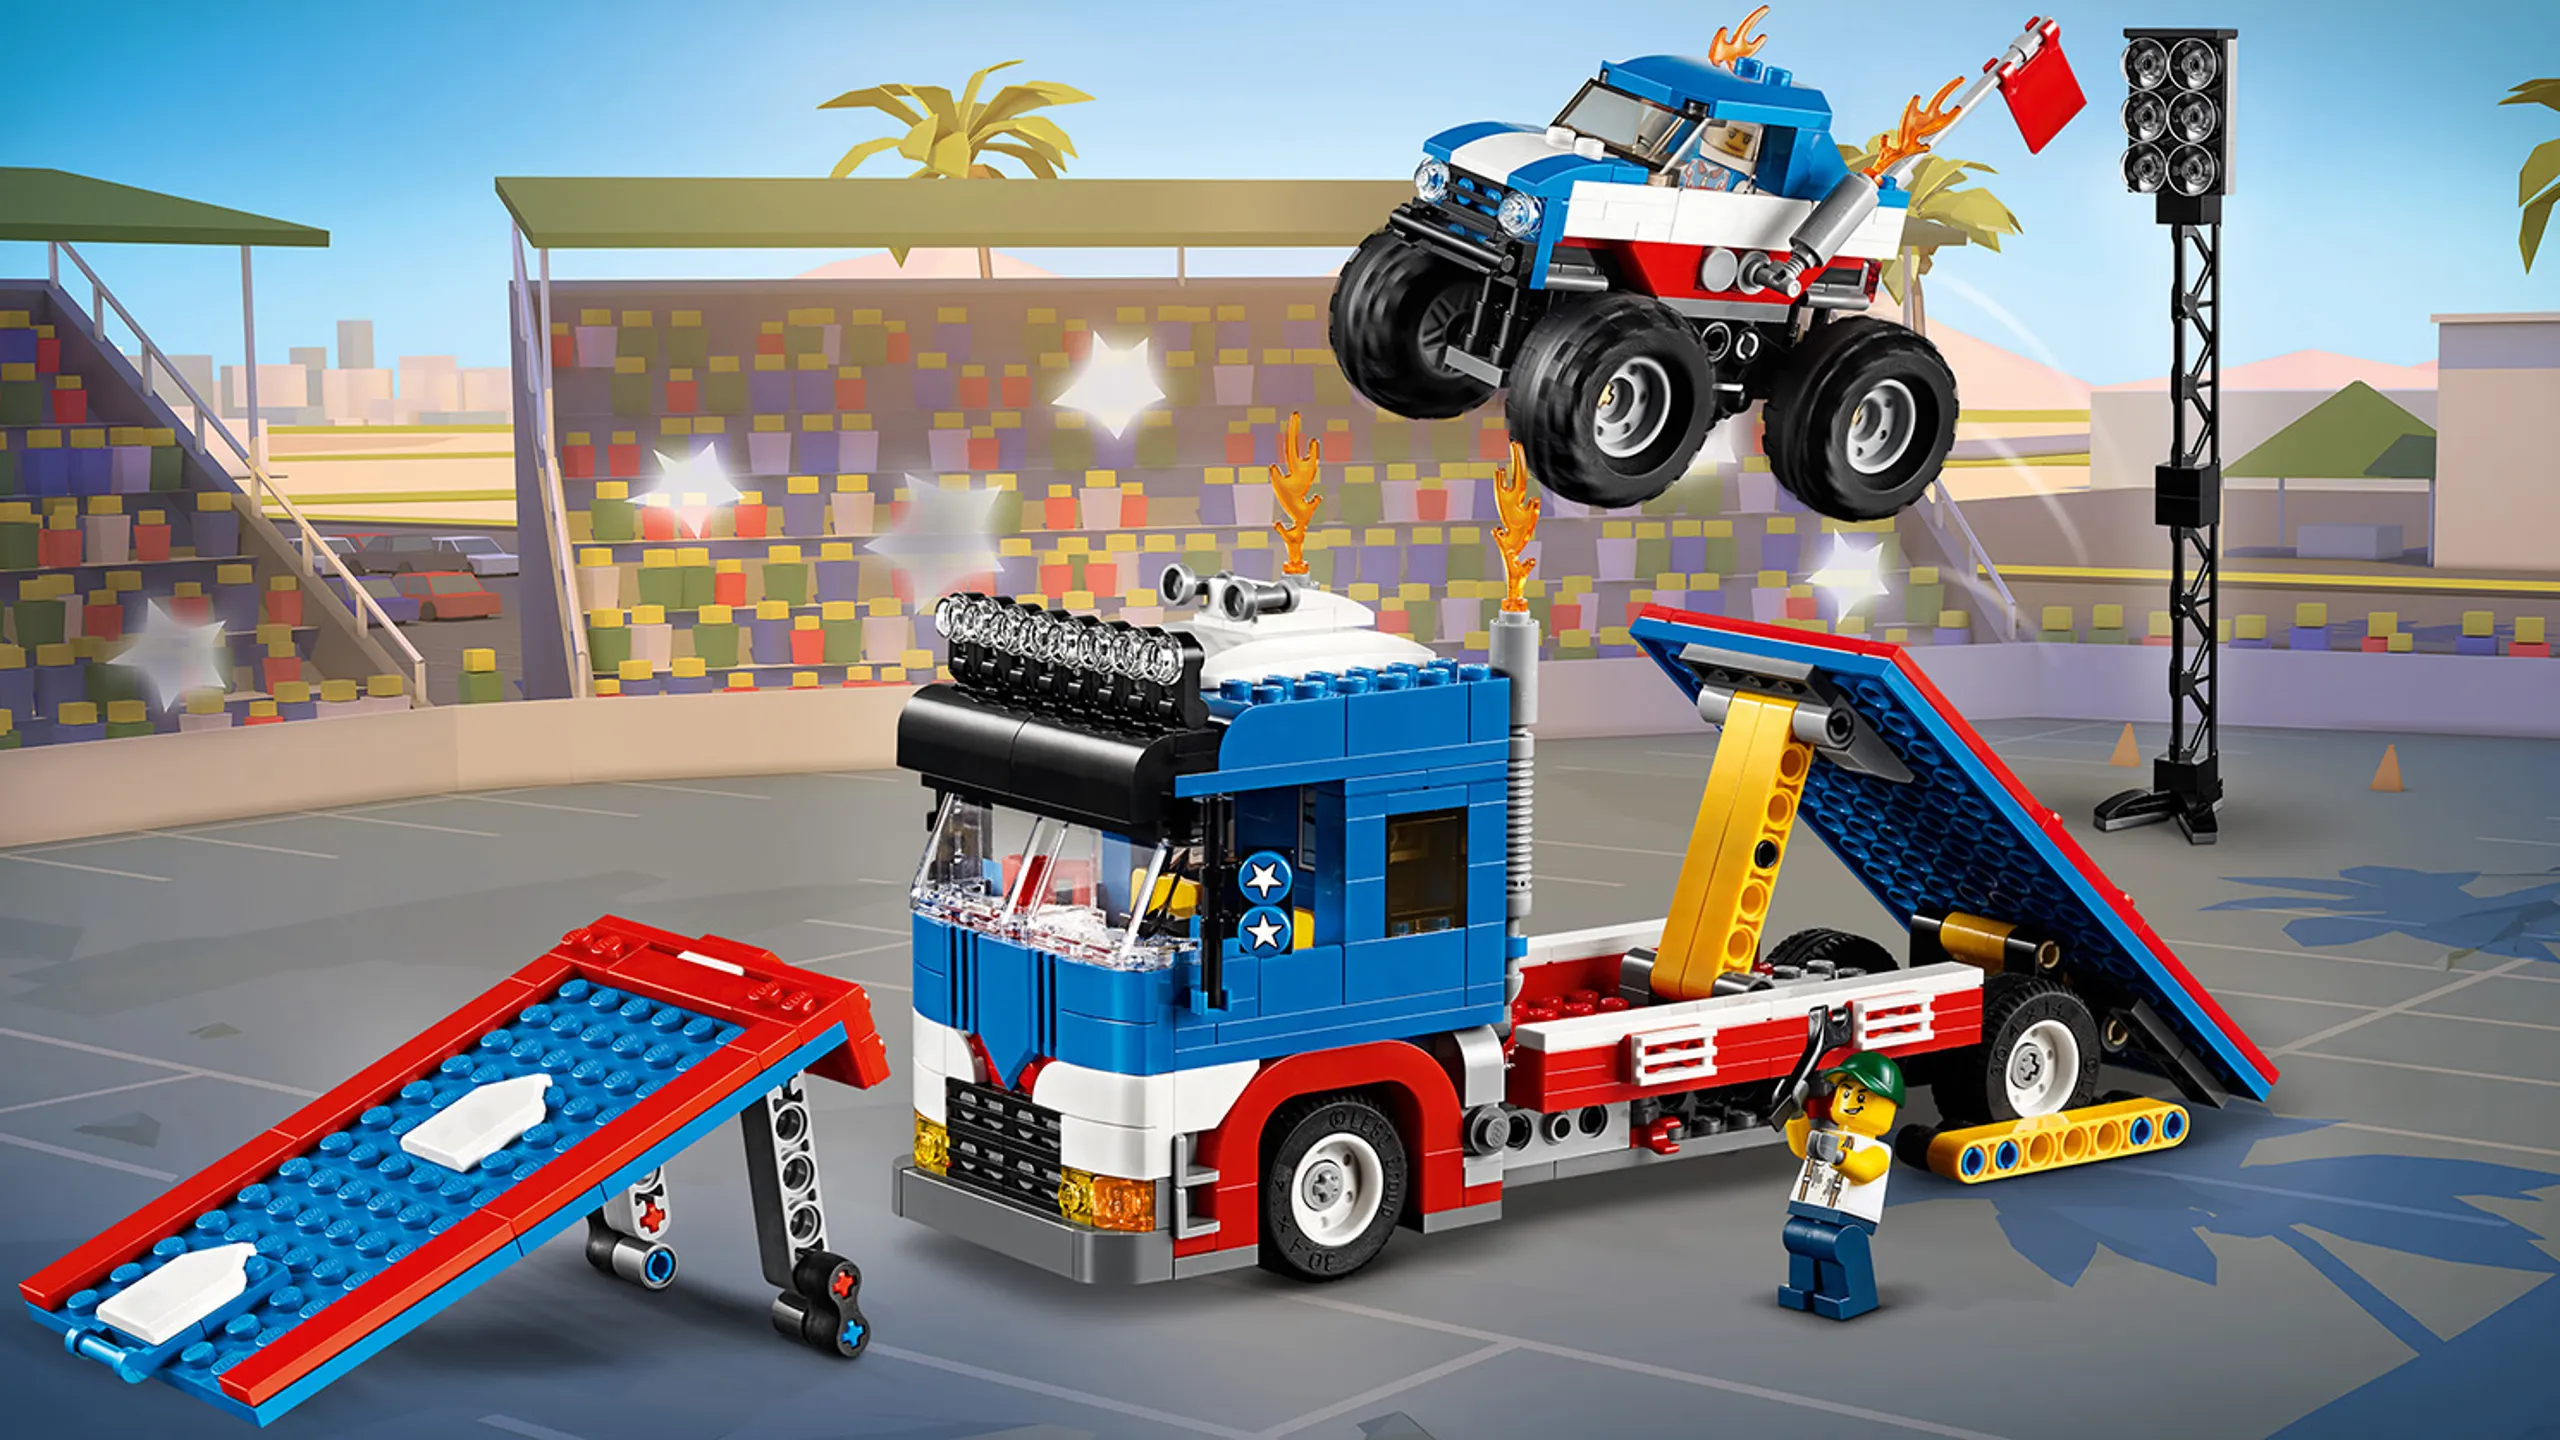 LEGO Creator 3 in 1 - 31085 Mobile Stunt Show - Convert the trailers of the truck into ramps and make a stunt show with a small blue monster truck.